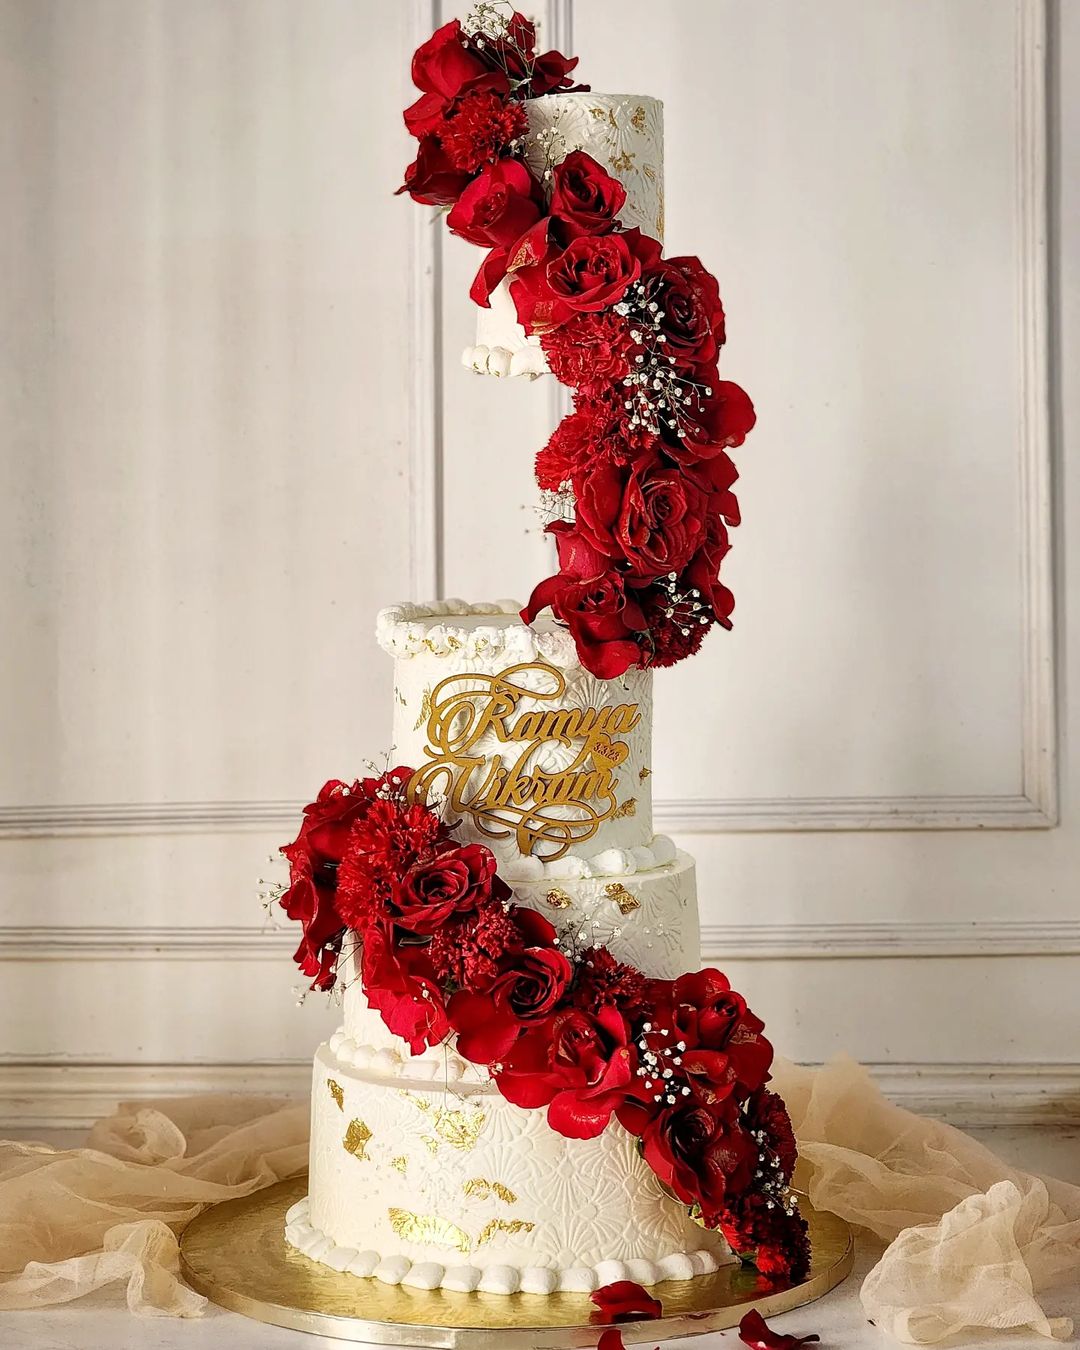 4 tier gold and red roses floating wedidng cake via thedarklove